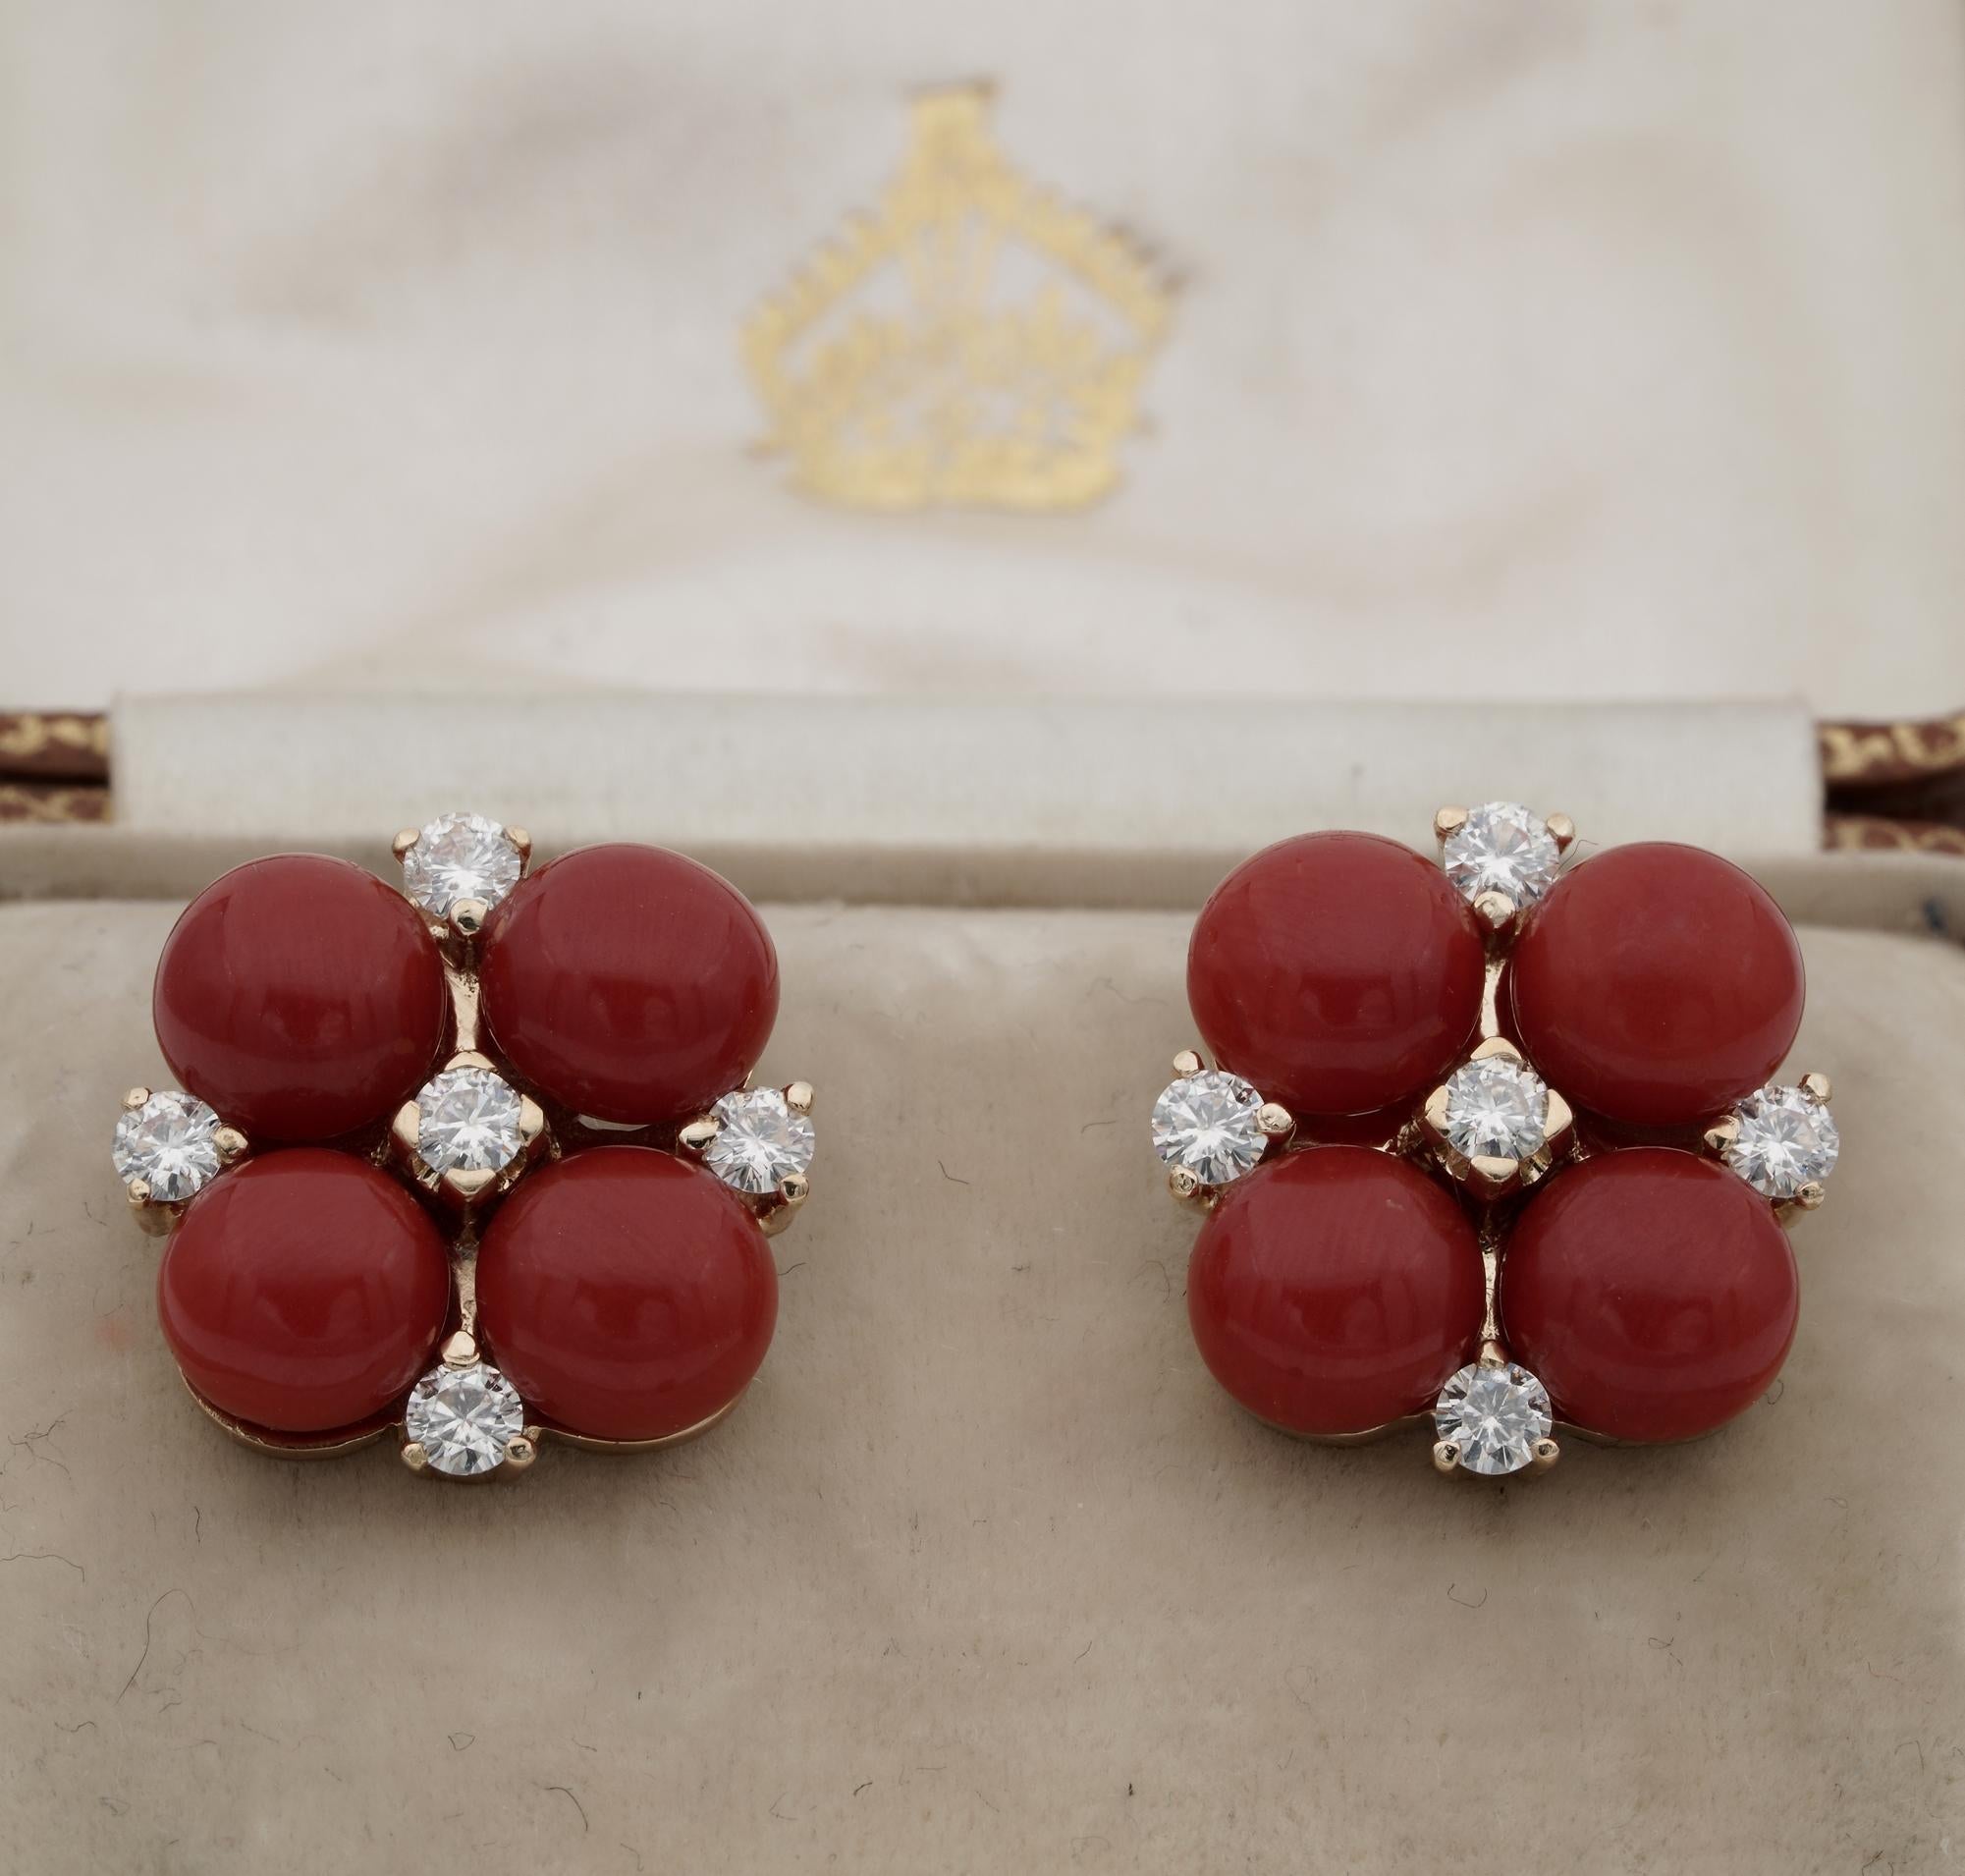 Coral Appeal

Charming pair of timeless taste Coral and Diamond earrings
Hand crafted of solid 18 KT gold in a lovely floret design of appealing taste and elegance
Set with a selection of intense Red Natural untreated Sardinia Coral comprising four